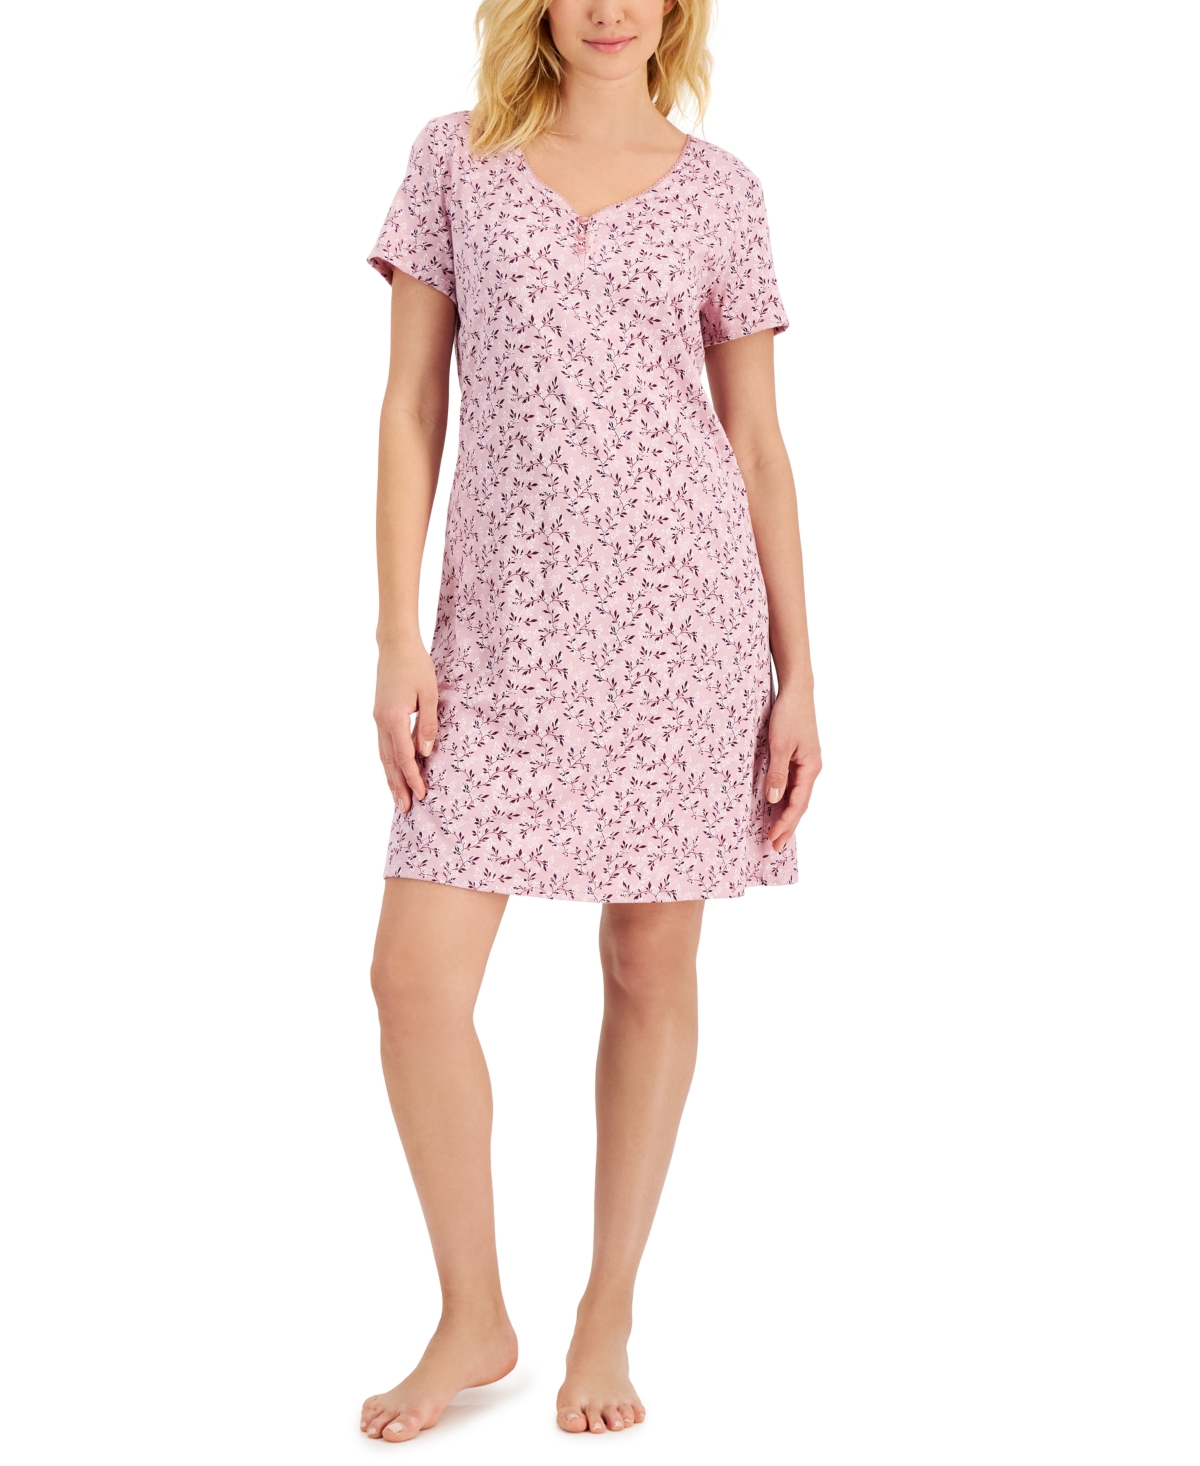 Charter Club Women's Short Sleeve Cotton Essentials Chemise Nightgown, Created for Macy's